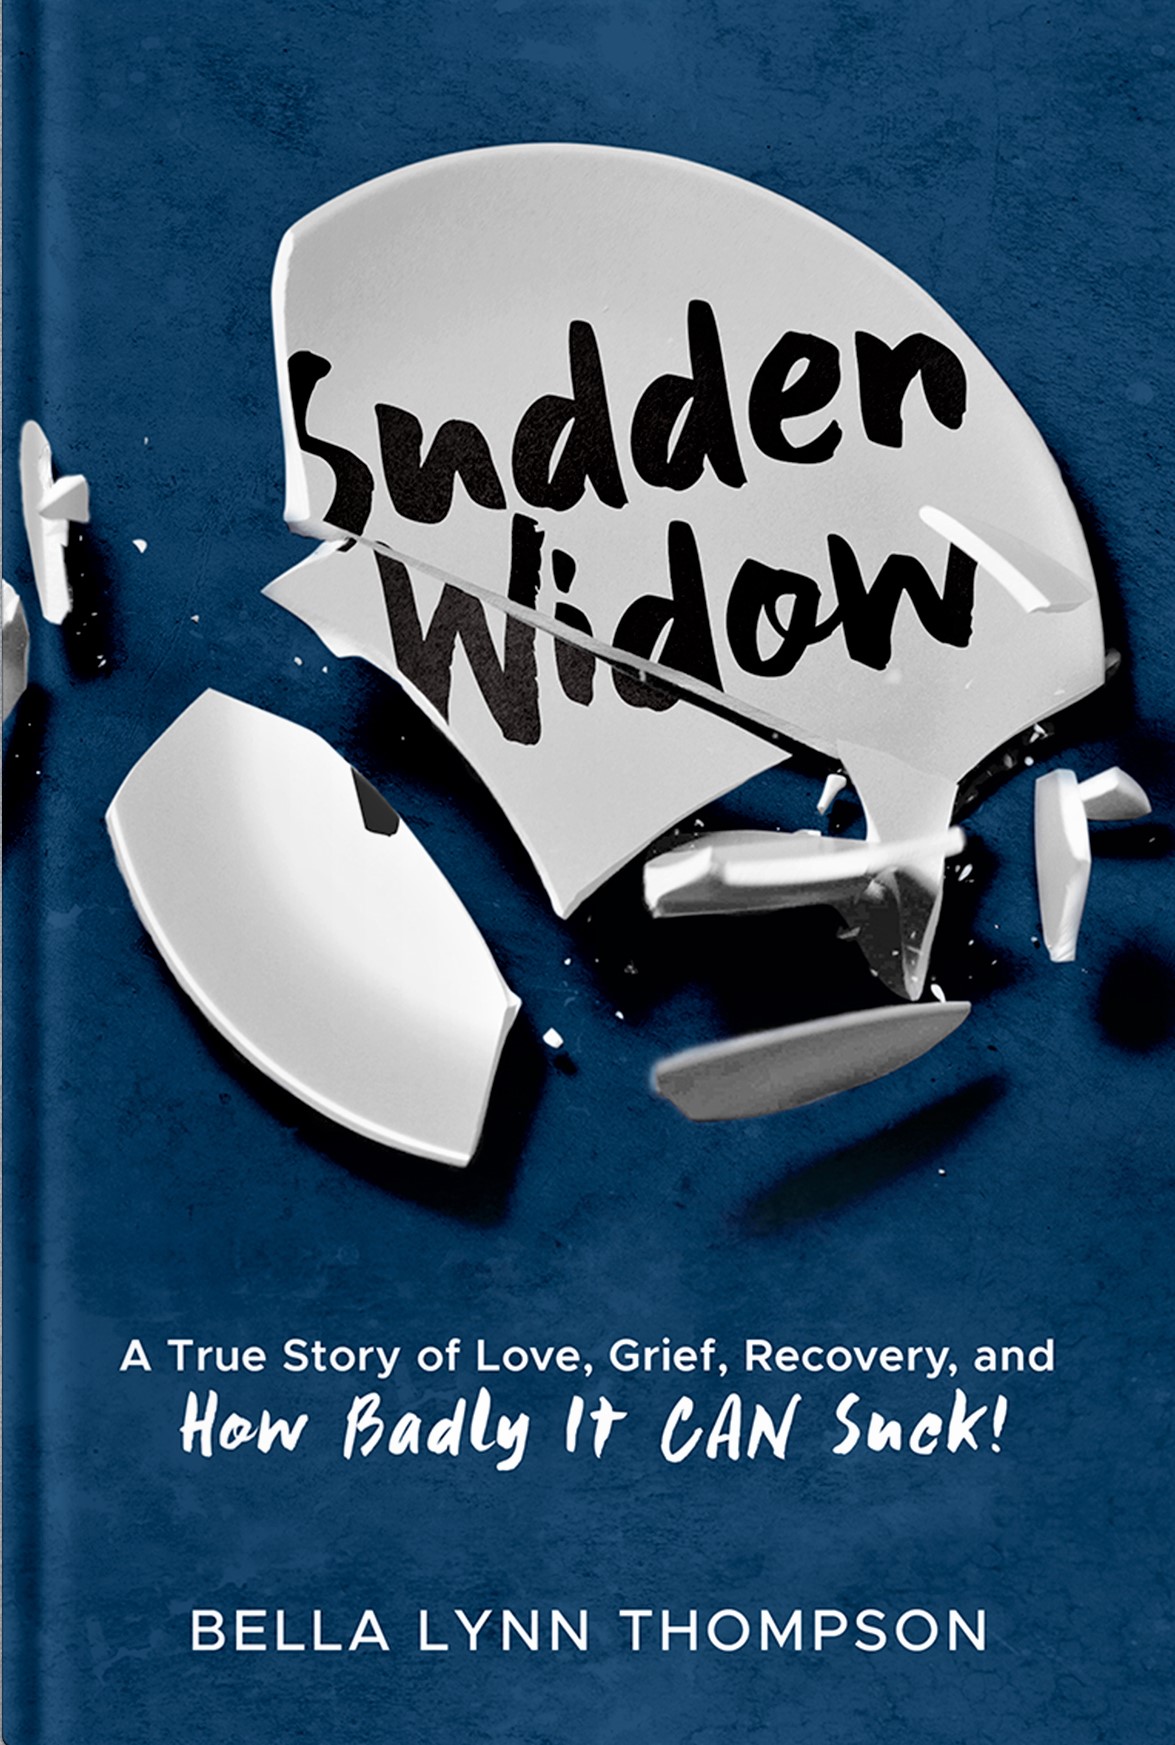 Sudden Widow (those words) are in a 3D mock-up of a broken plate and the subtitle is below